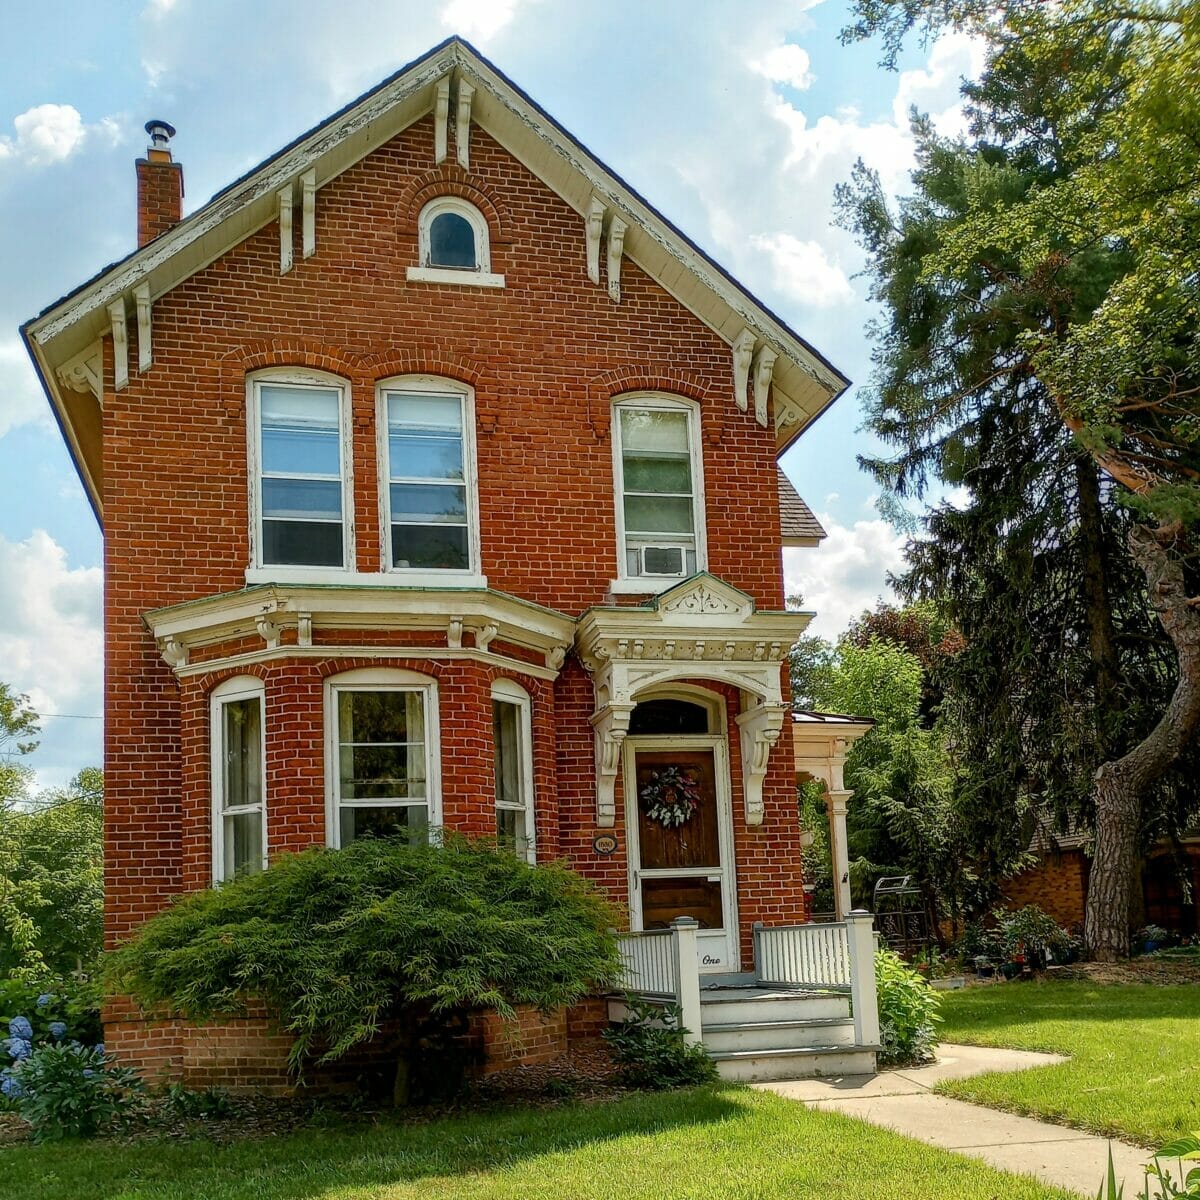 This home in Dearborn, Michigan on South Military Street was built in 1880.